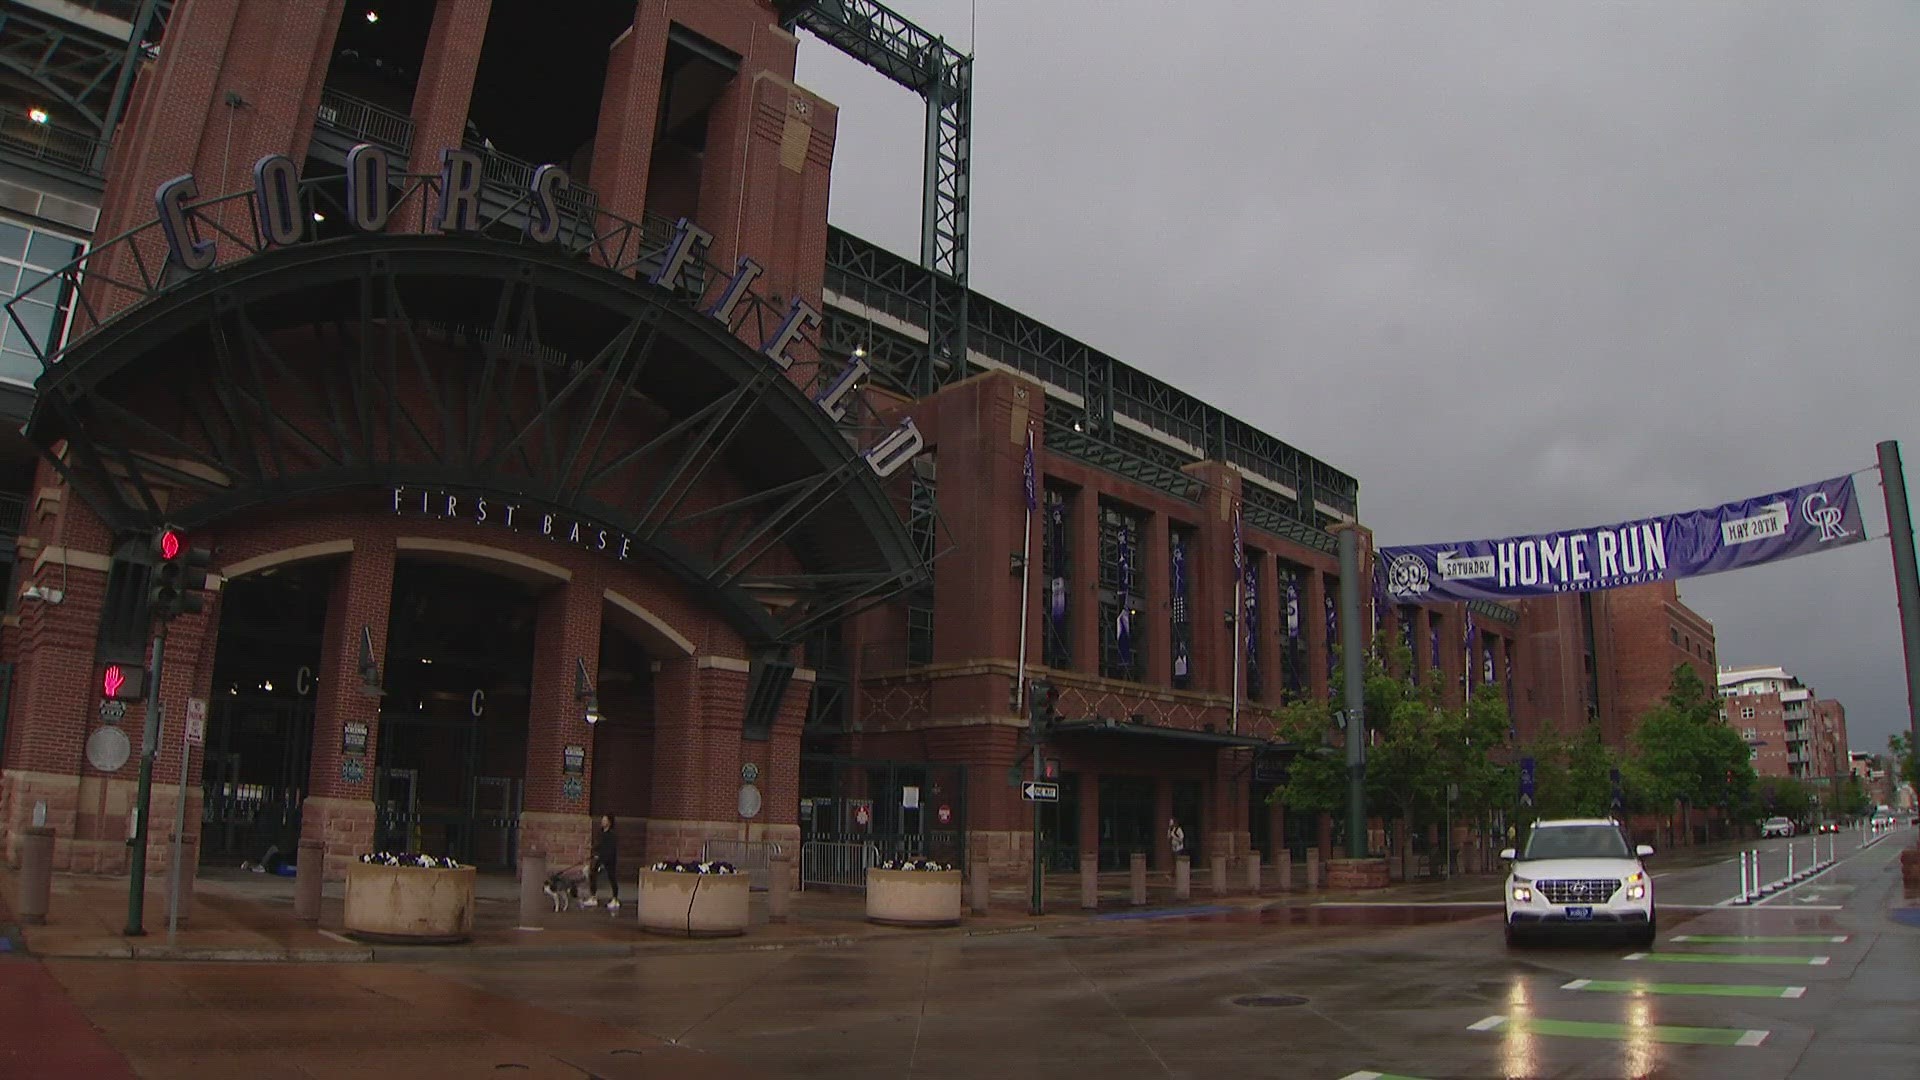 Coors Field is one of the most lightning-prone stadiums in all of Major League Baseball.